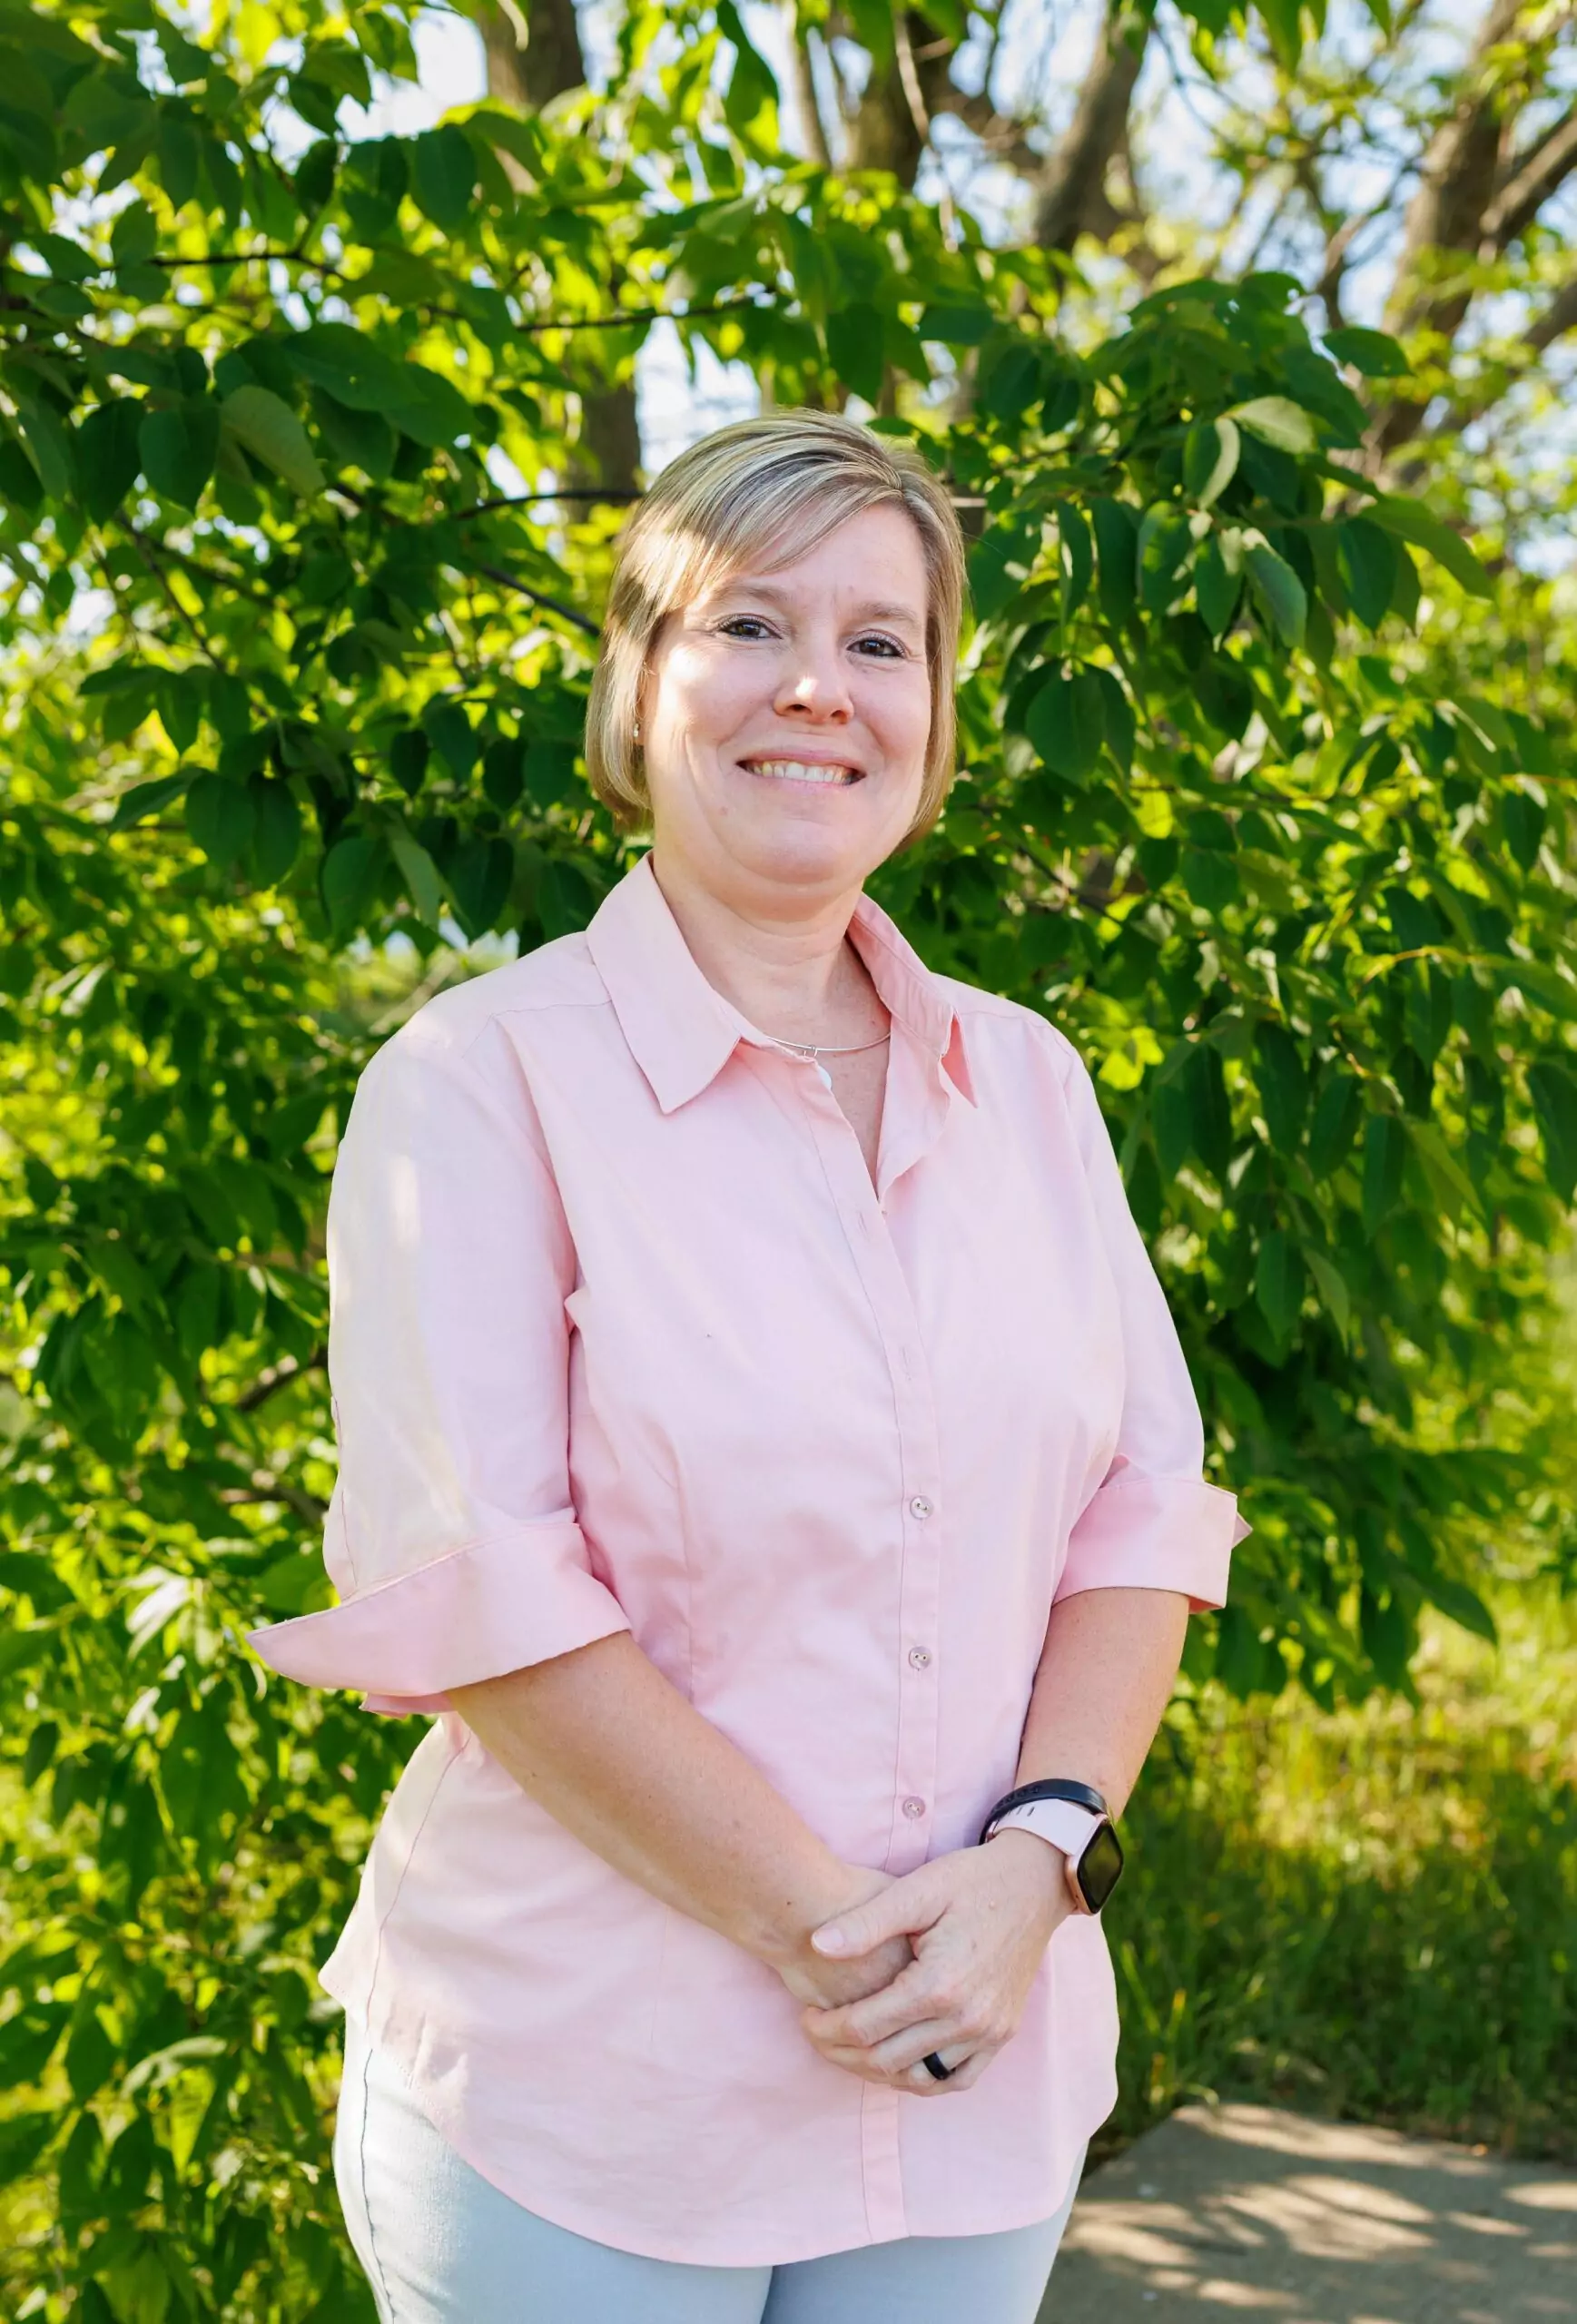 Angela Rodgers standing in front of a green tree. She has short blond hair and is smiling with her arms folded in front of her. She is wearing a pink button up shirt and tan pants.